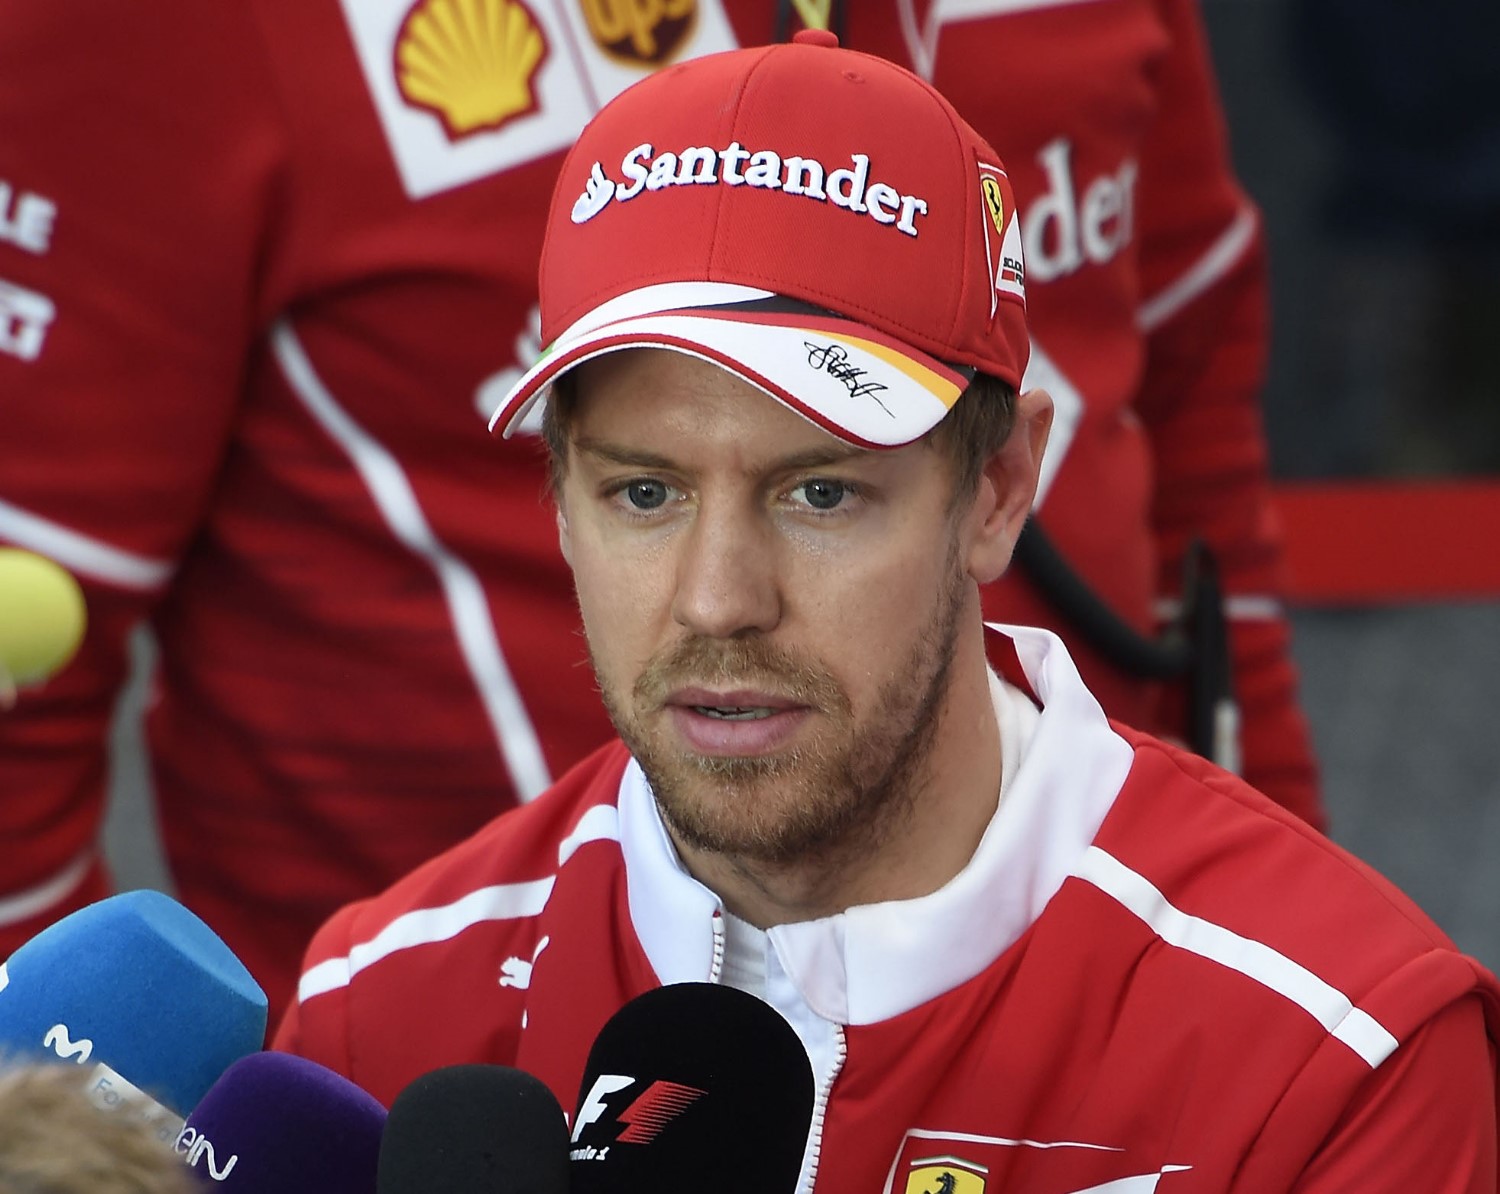 Vettel tells the assembled media it's too early to tel whether Ferrari has caught Mercedes